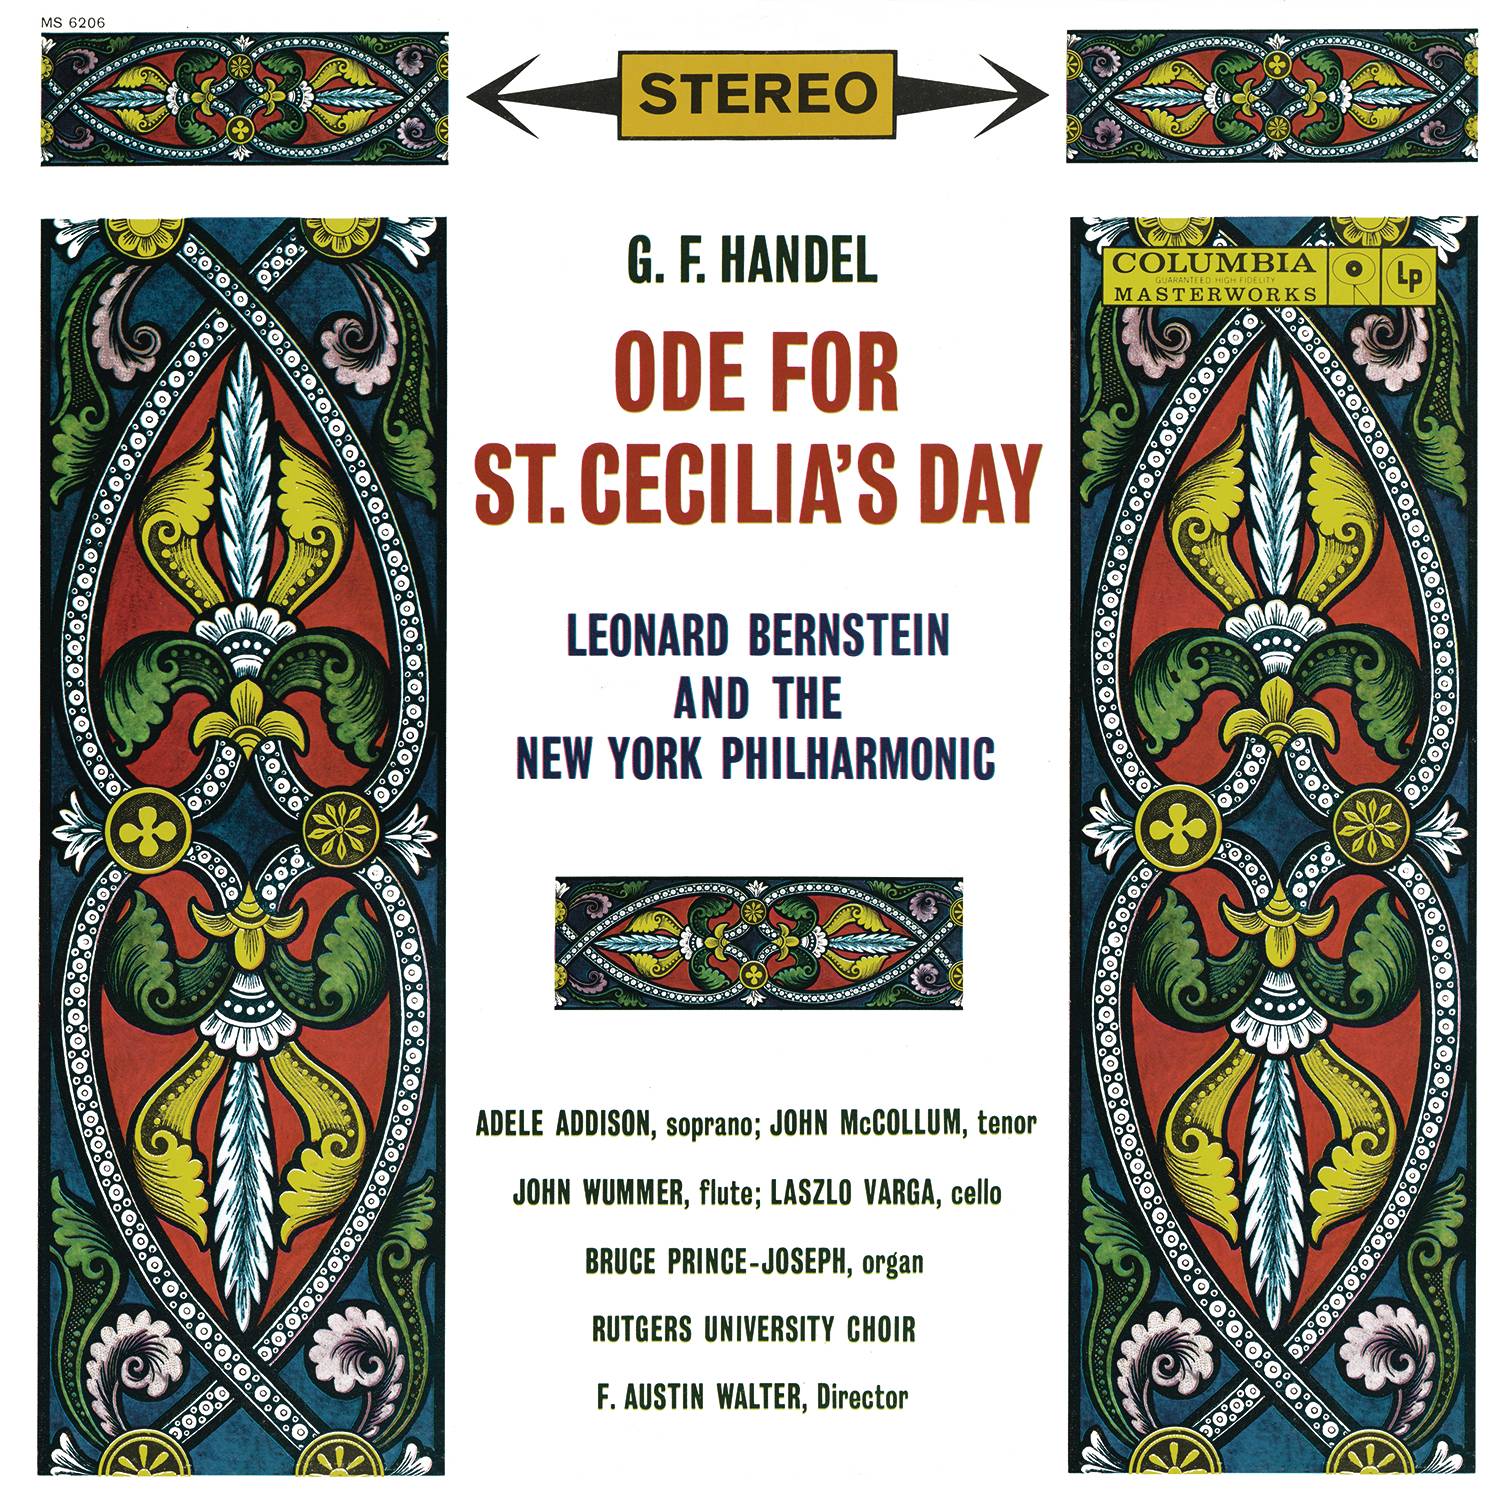 Ode For St. Cecilia's Day, HWV 76:No. 3, What passion cannot music raise (Aria)